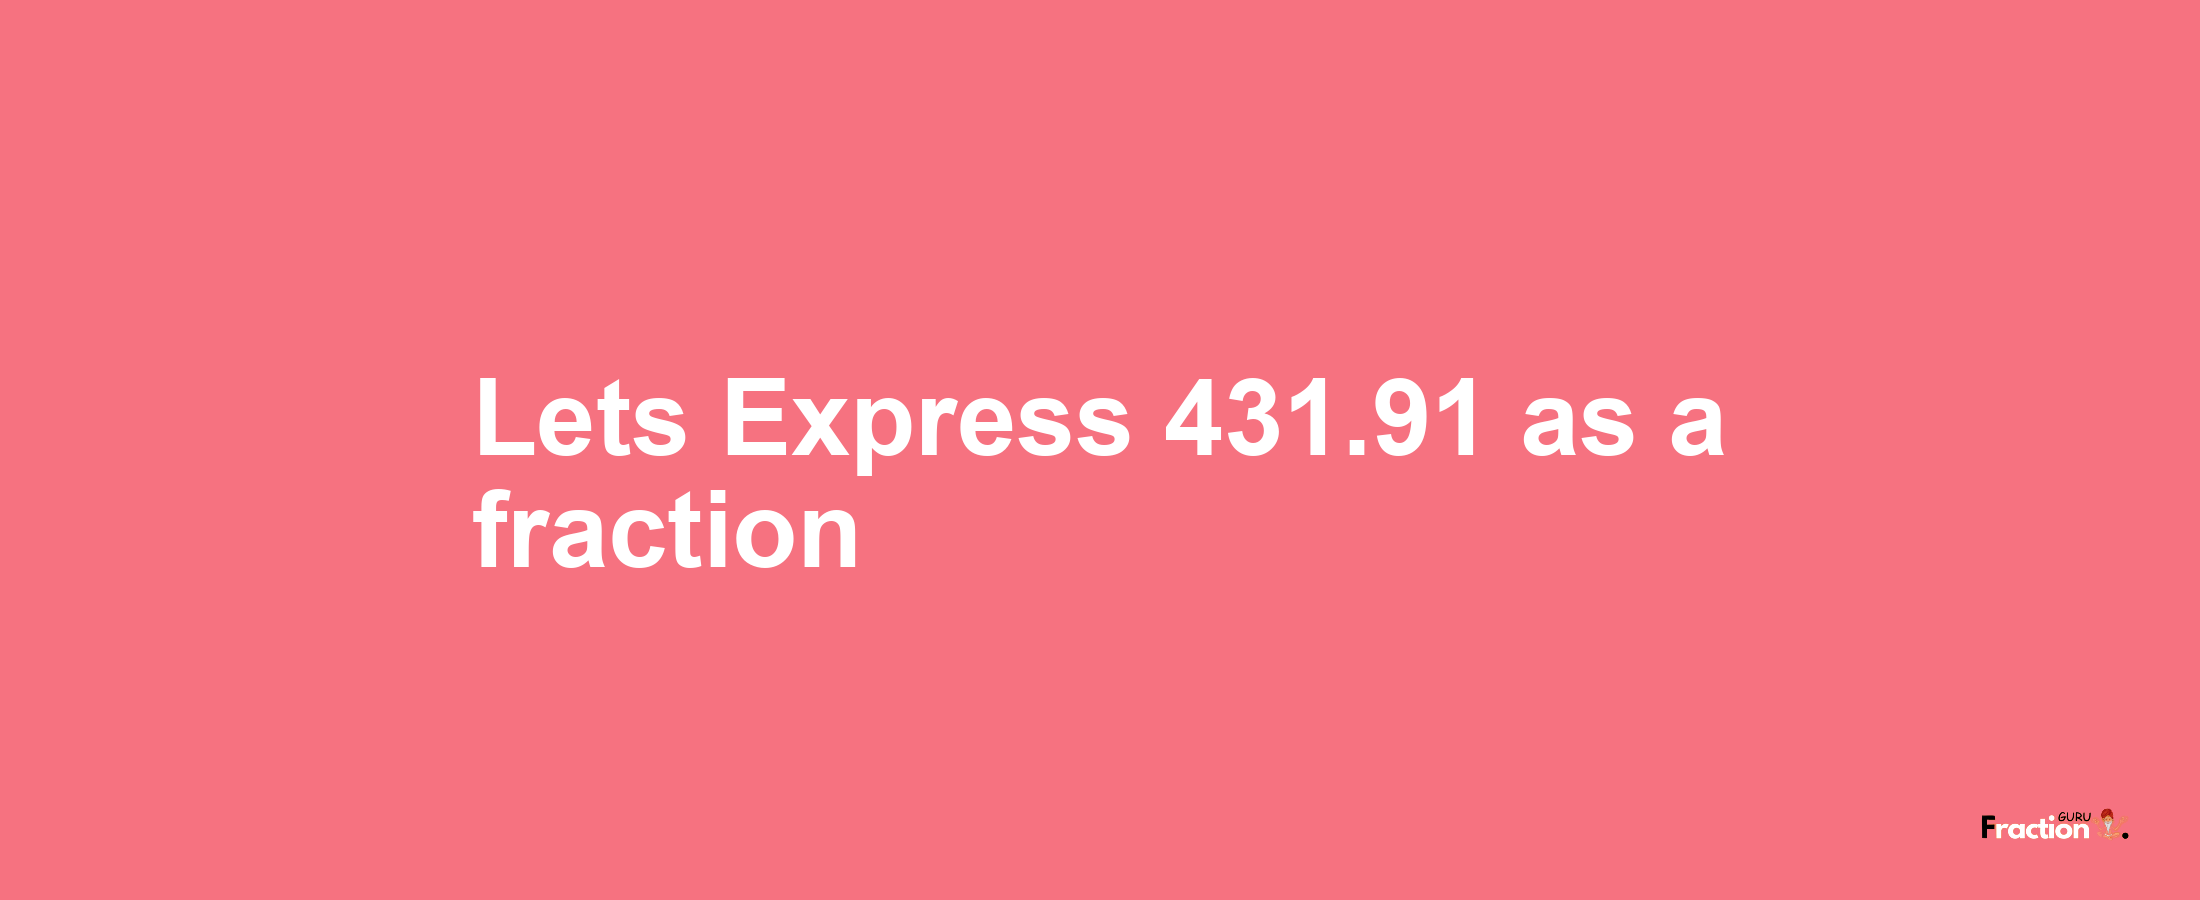 Lets Express 431.91 as afraction